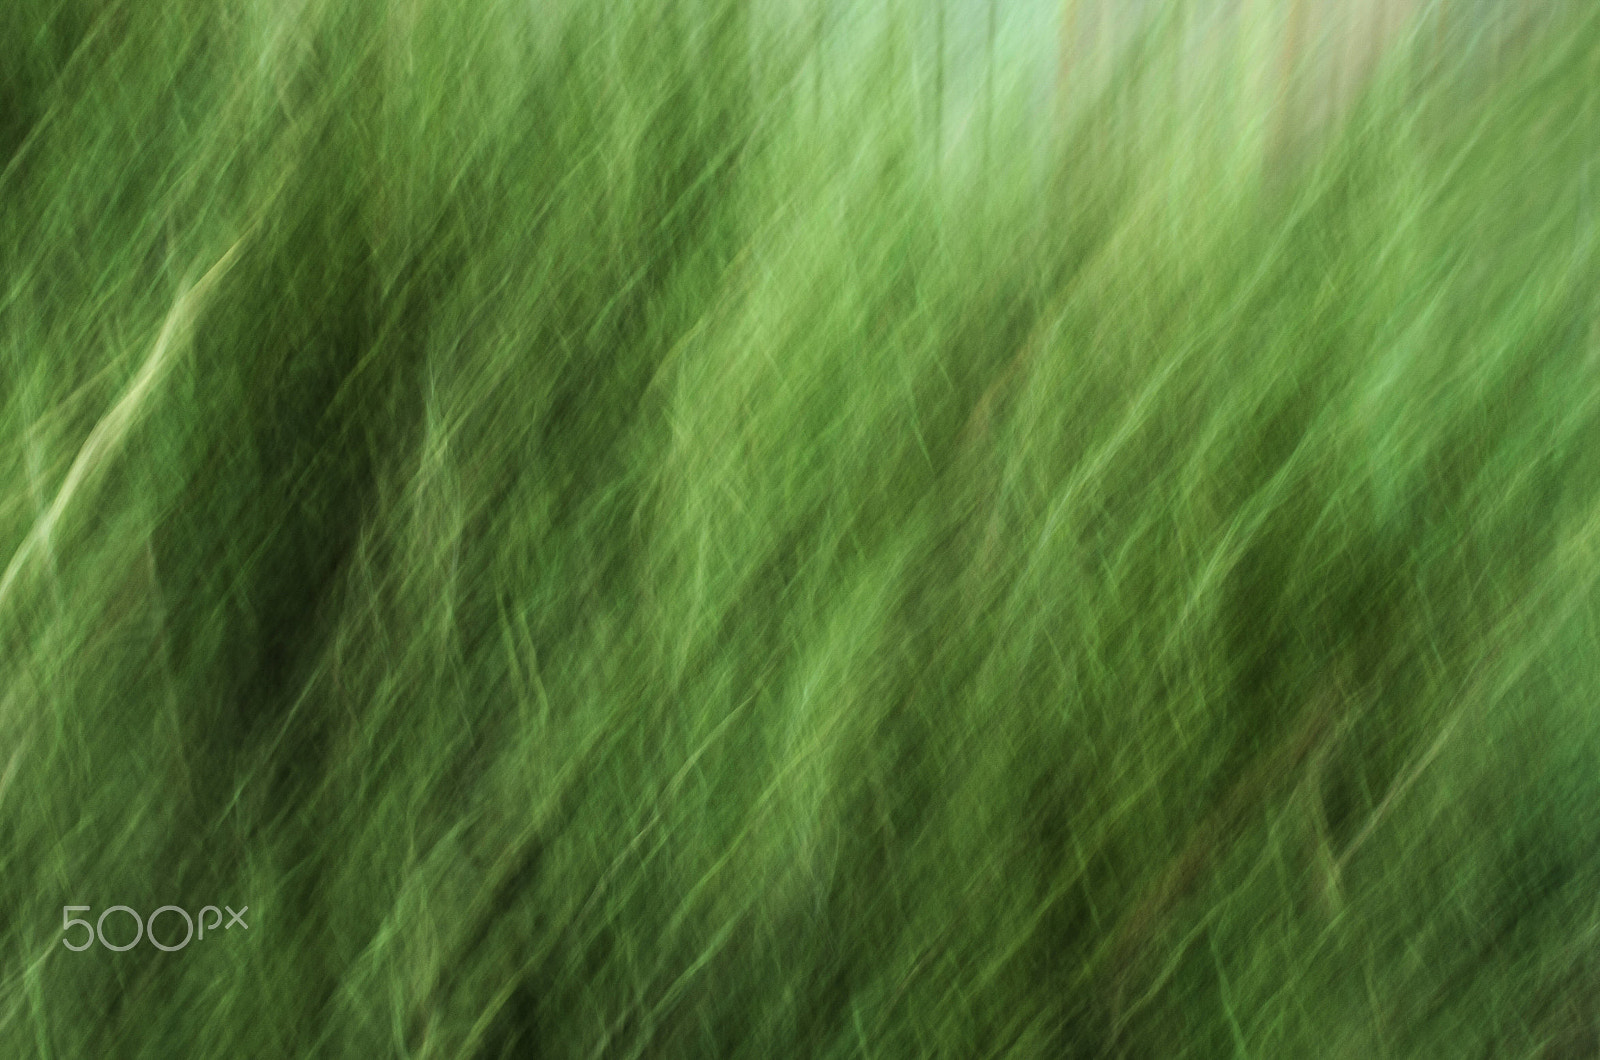 Pentax K-5 sample photo. Green texture abstract photography